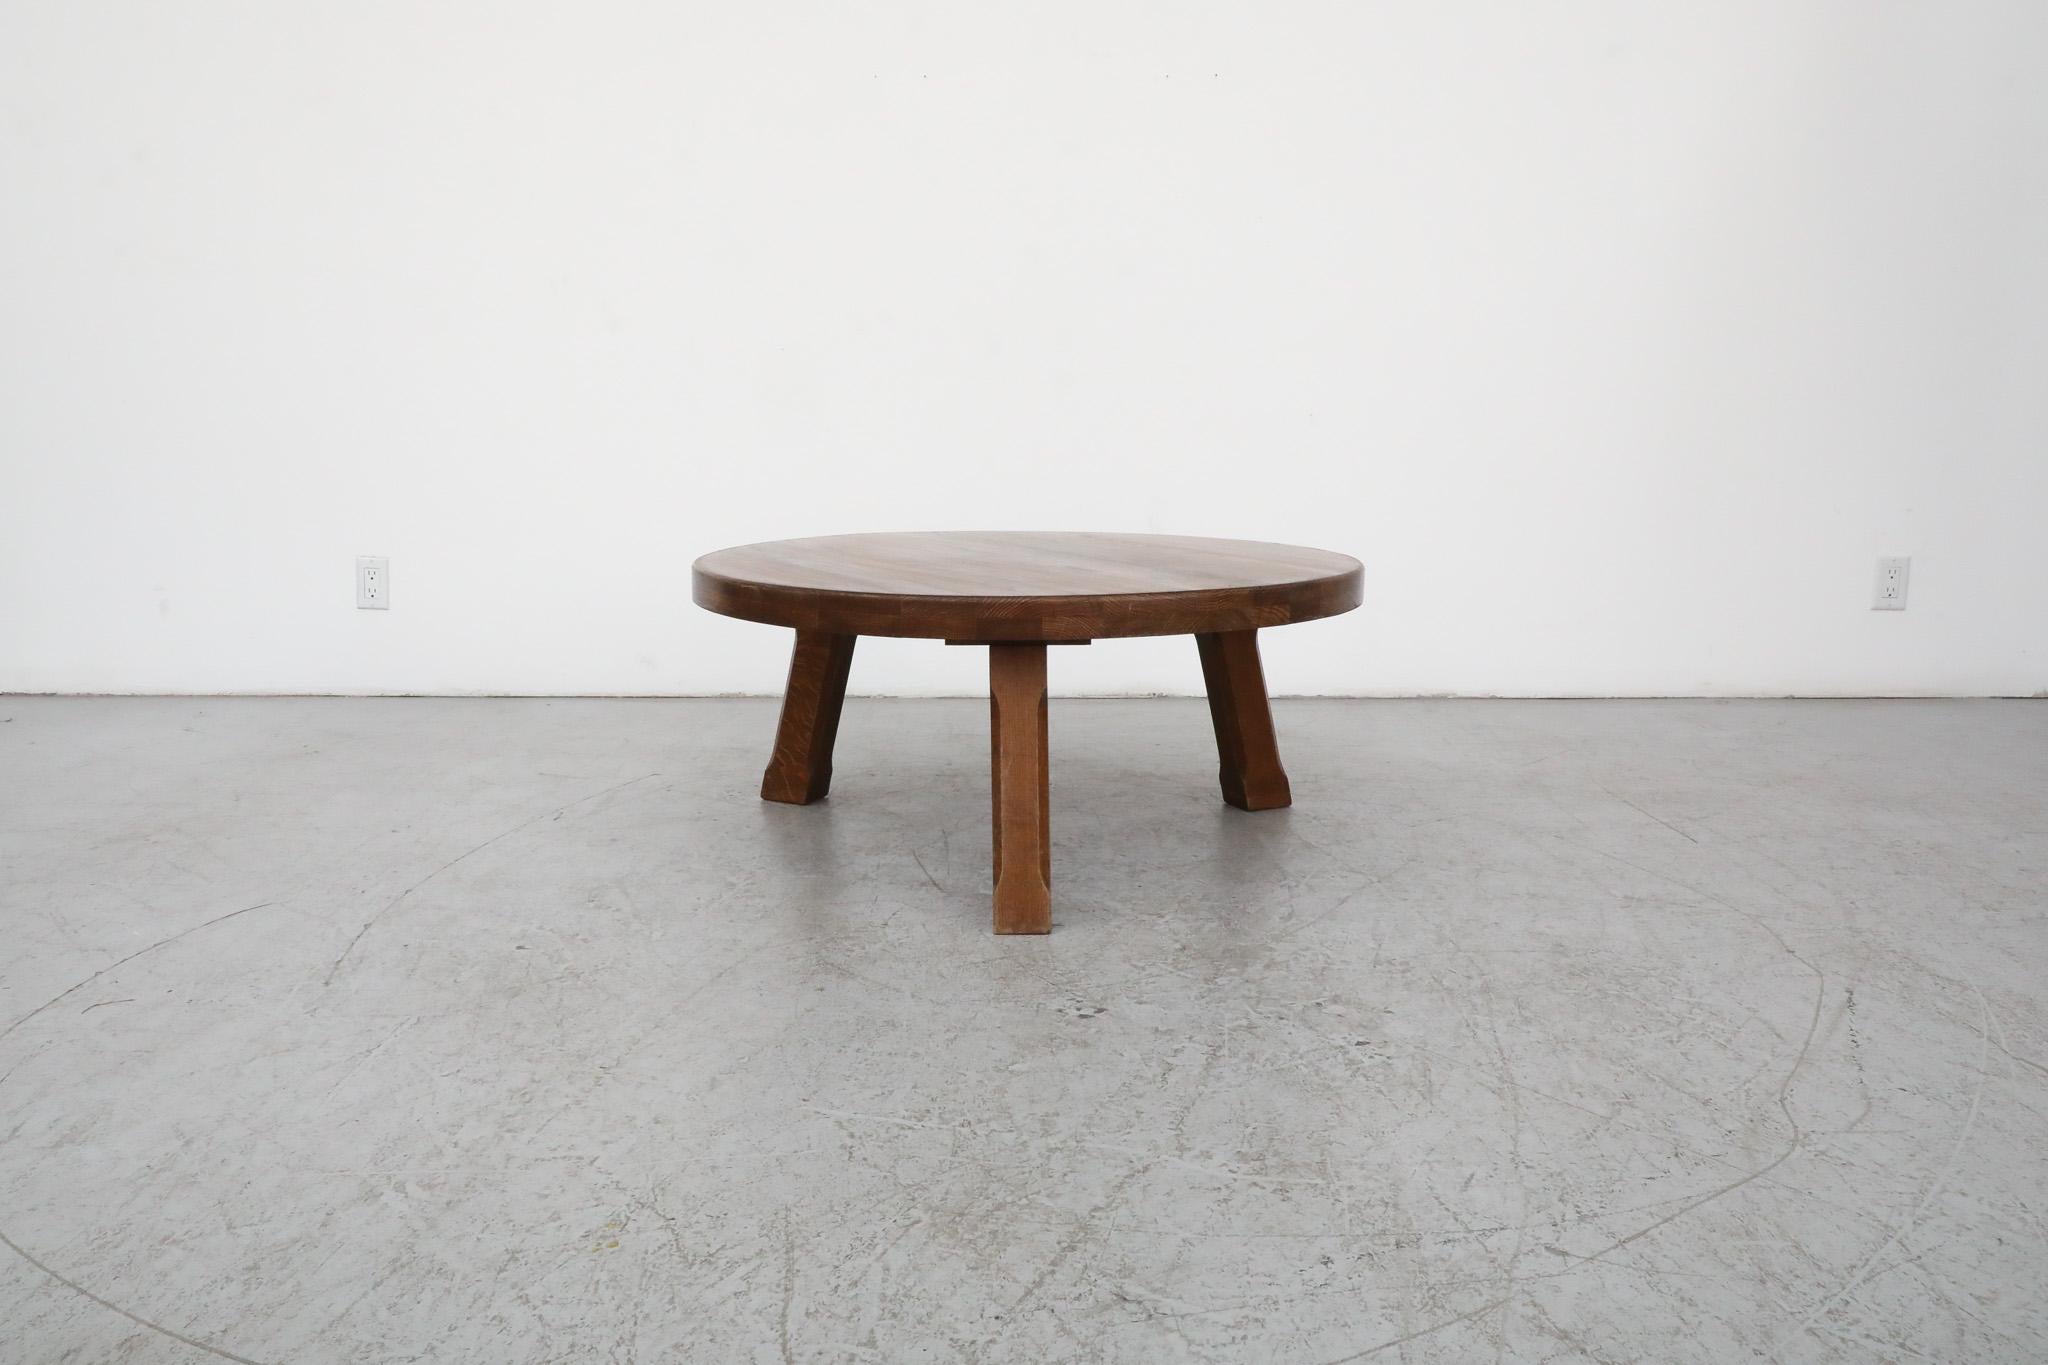 Pierre Chapo Inspired Stunning Heavy Brutalist Round Dark Oak Coffee Table In Good Condition For Sale In Los Angeles, CA